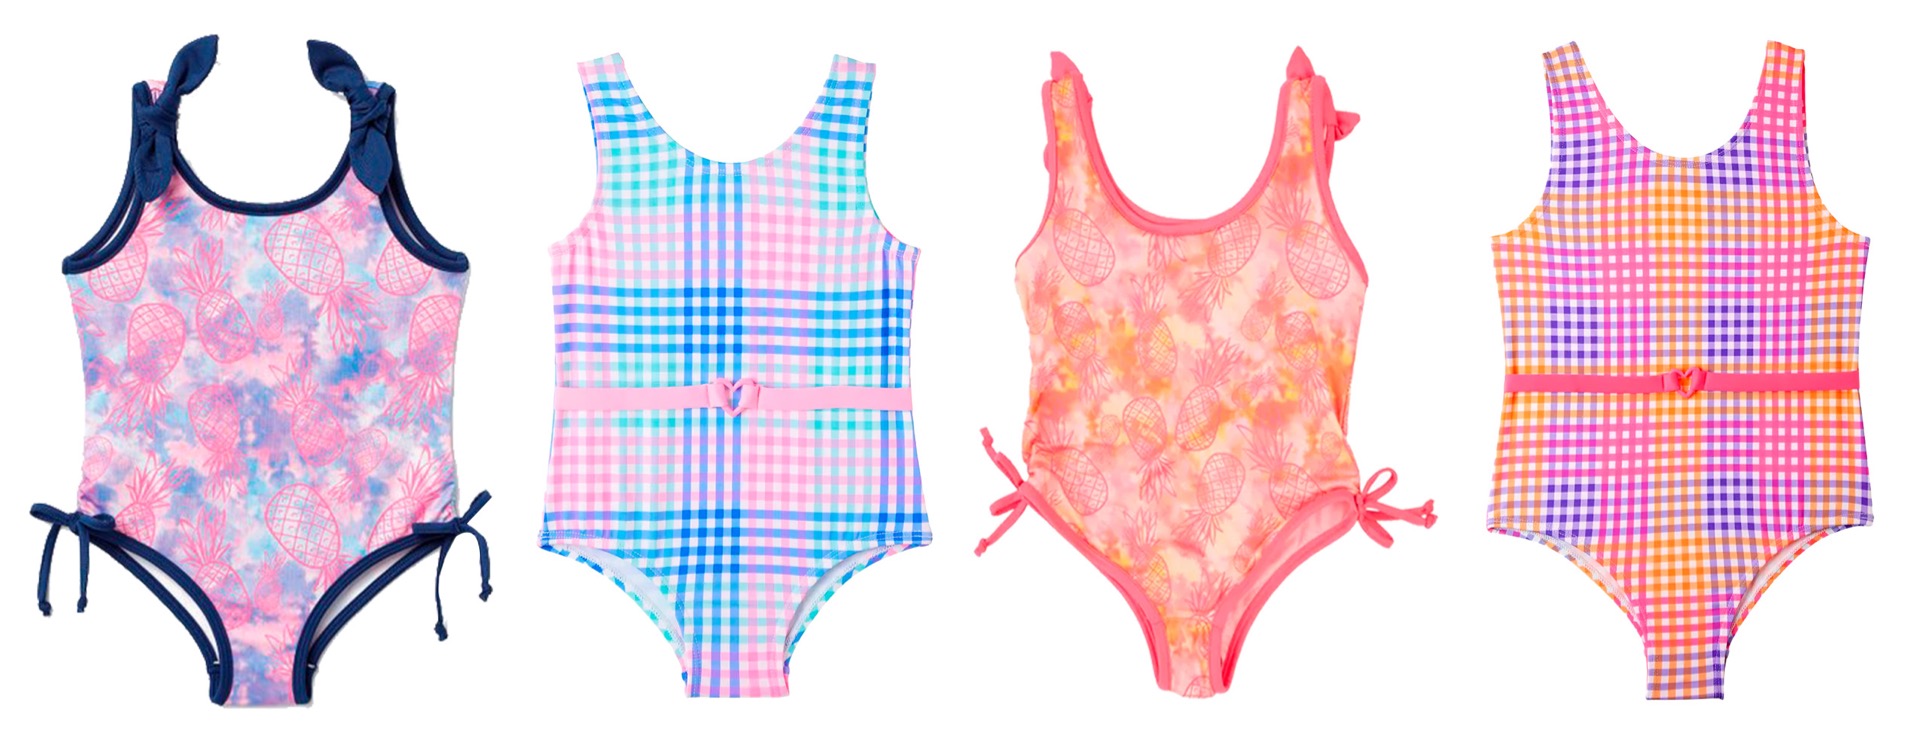 ''Toddler Girl's Printed One-Piece Swimsuits - Tie-Dye, Checkered, & Pineapple Print - Sizes 2T-4T''